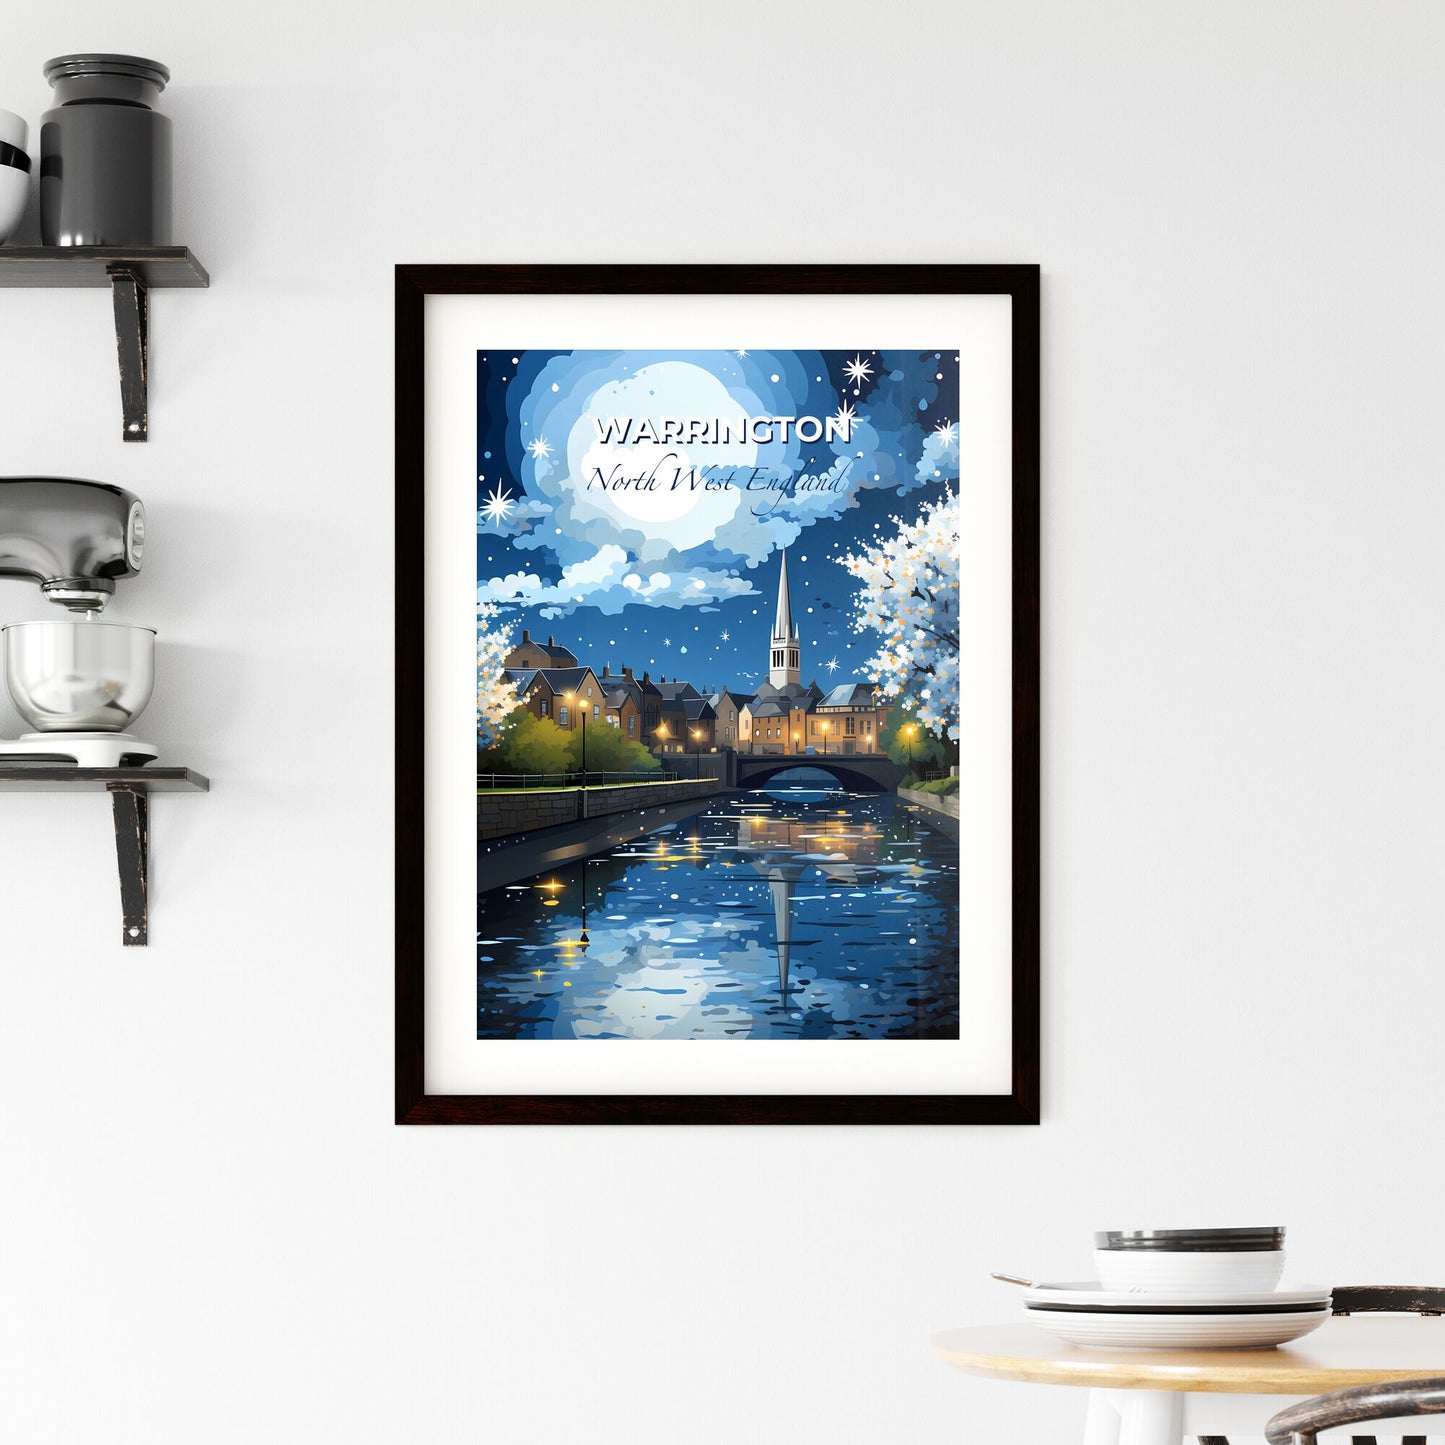 Warrington, North West England, A Poster of a river with trees and a bridge in the background Default Title